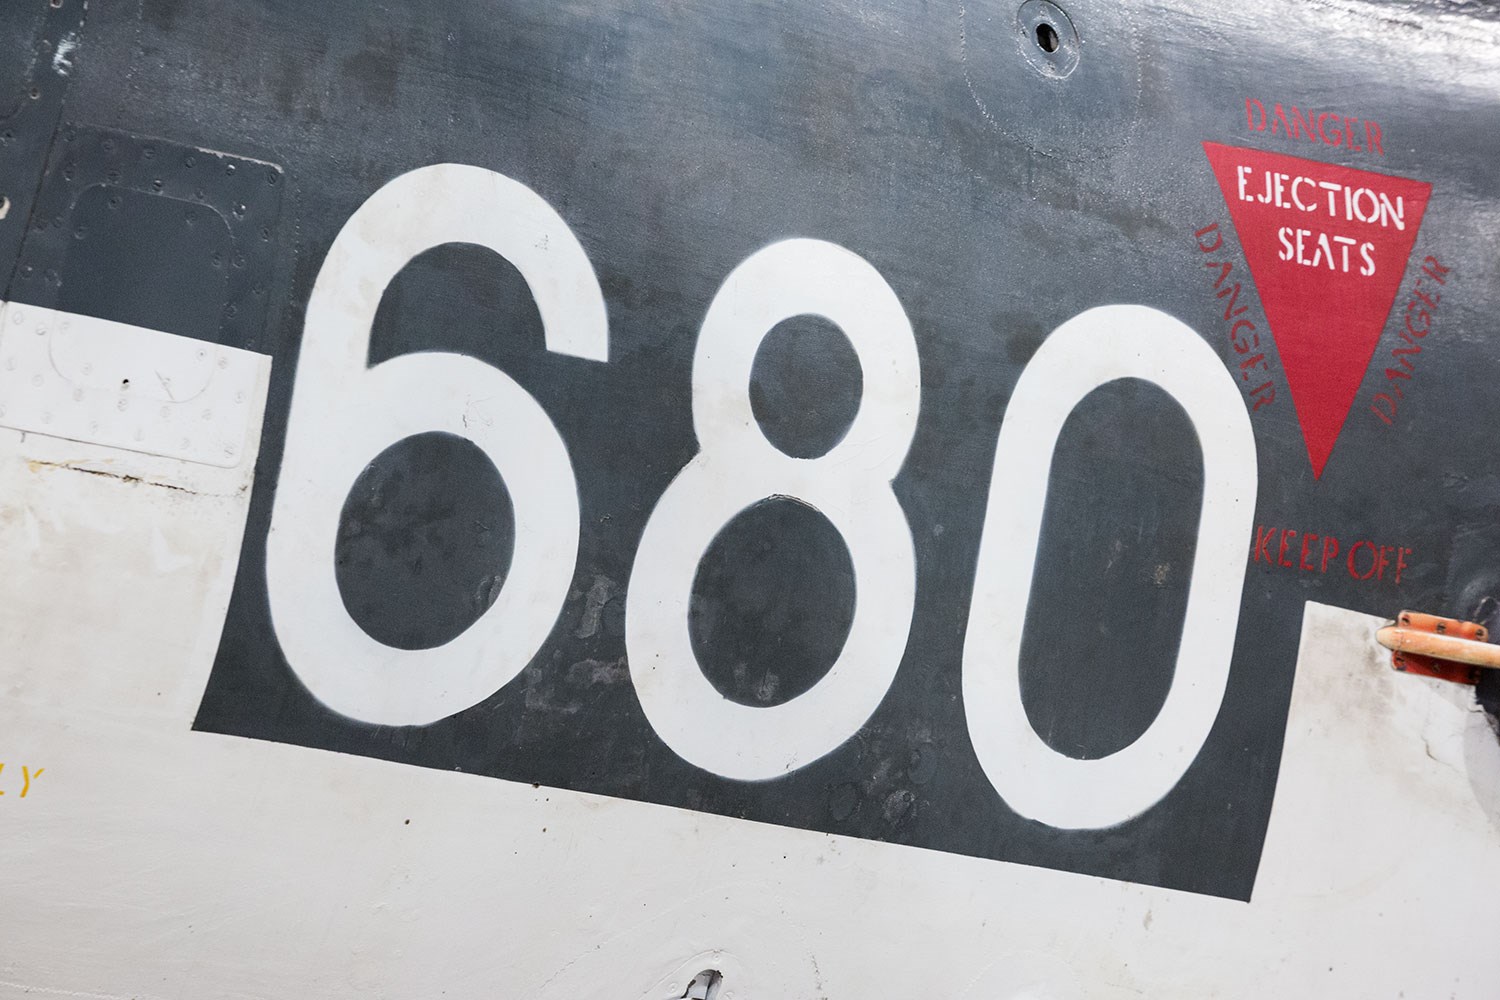 The side of a Sea Venom aircraft. There is the number 680 painted on the side and a symbol of a red triangle for ejection seats.